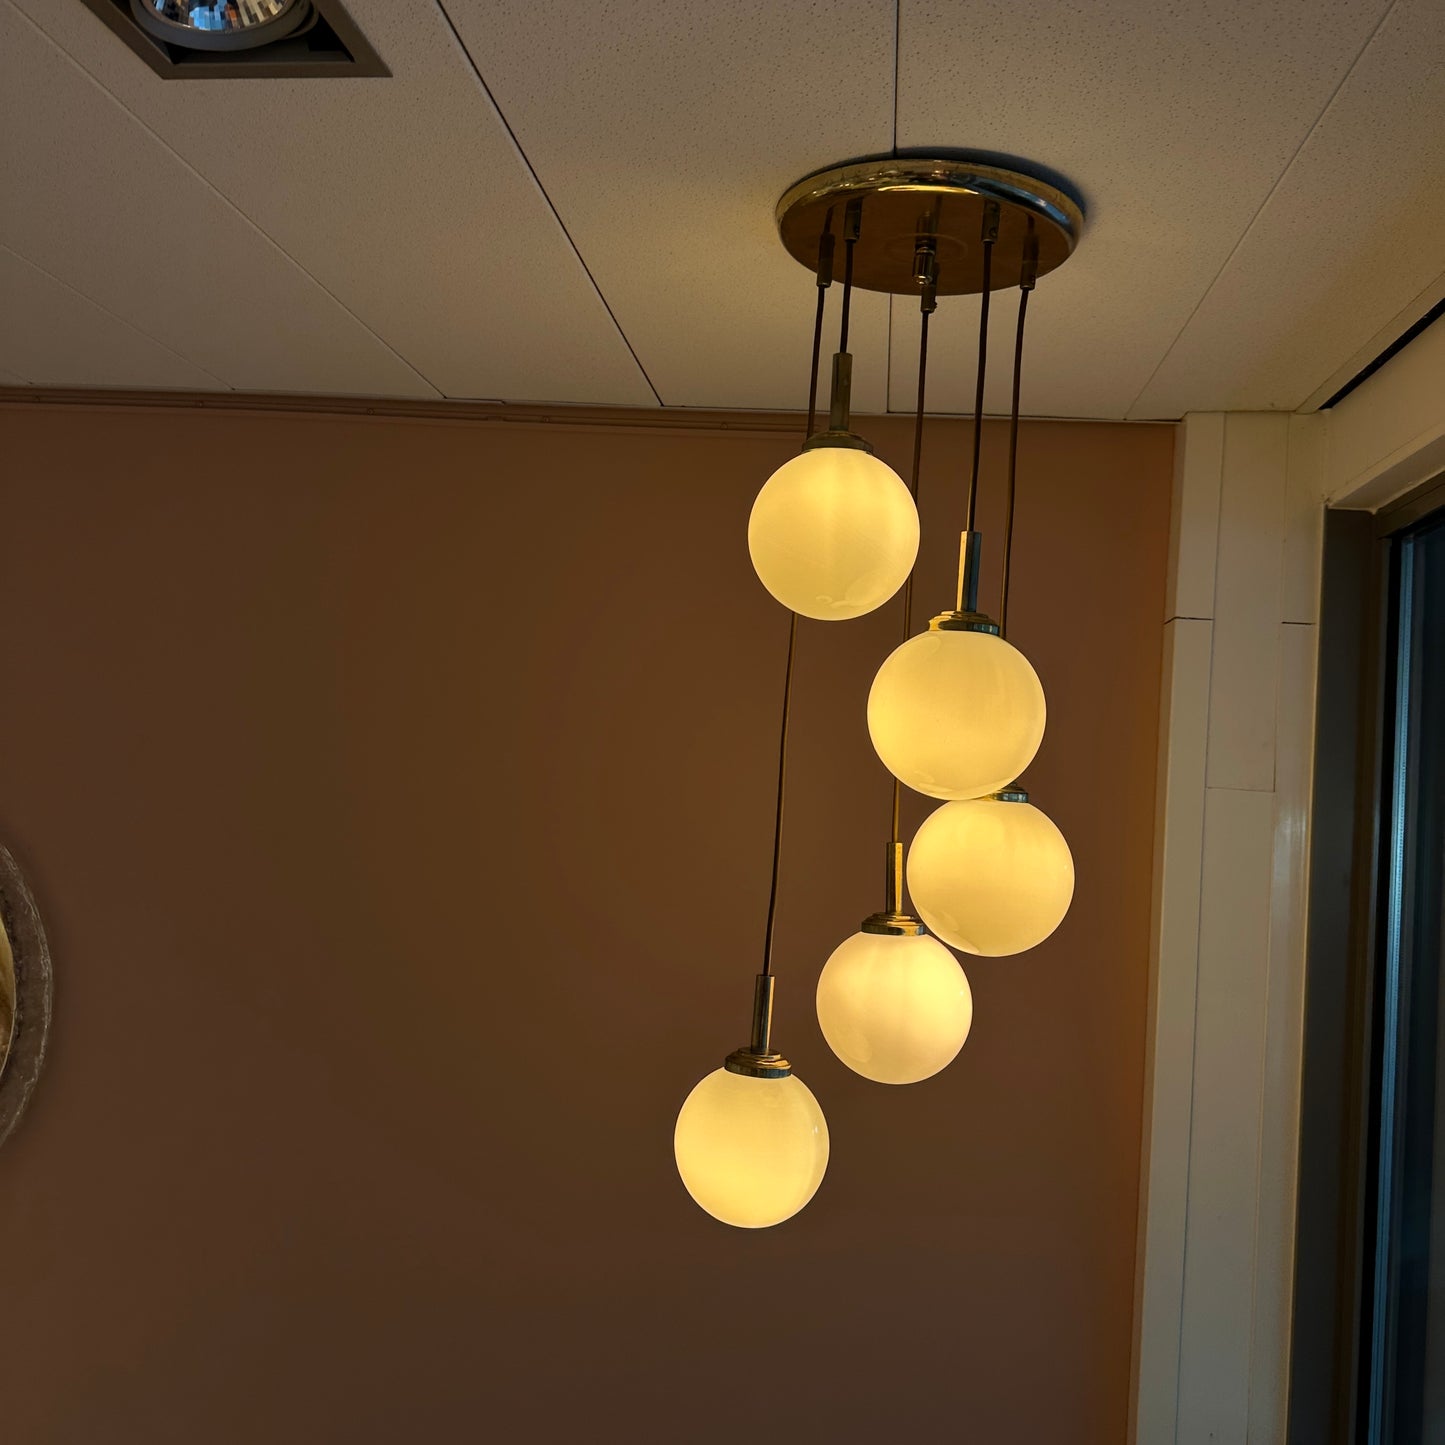 Hanging lamp with 5 opal glass white balls